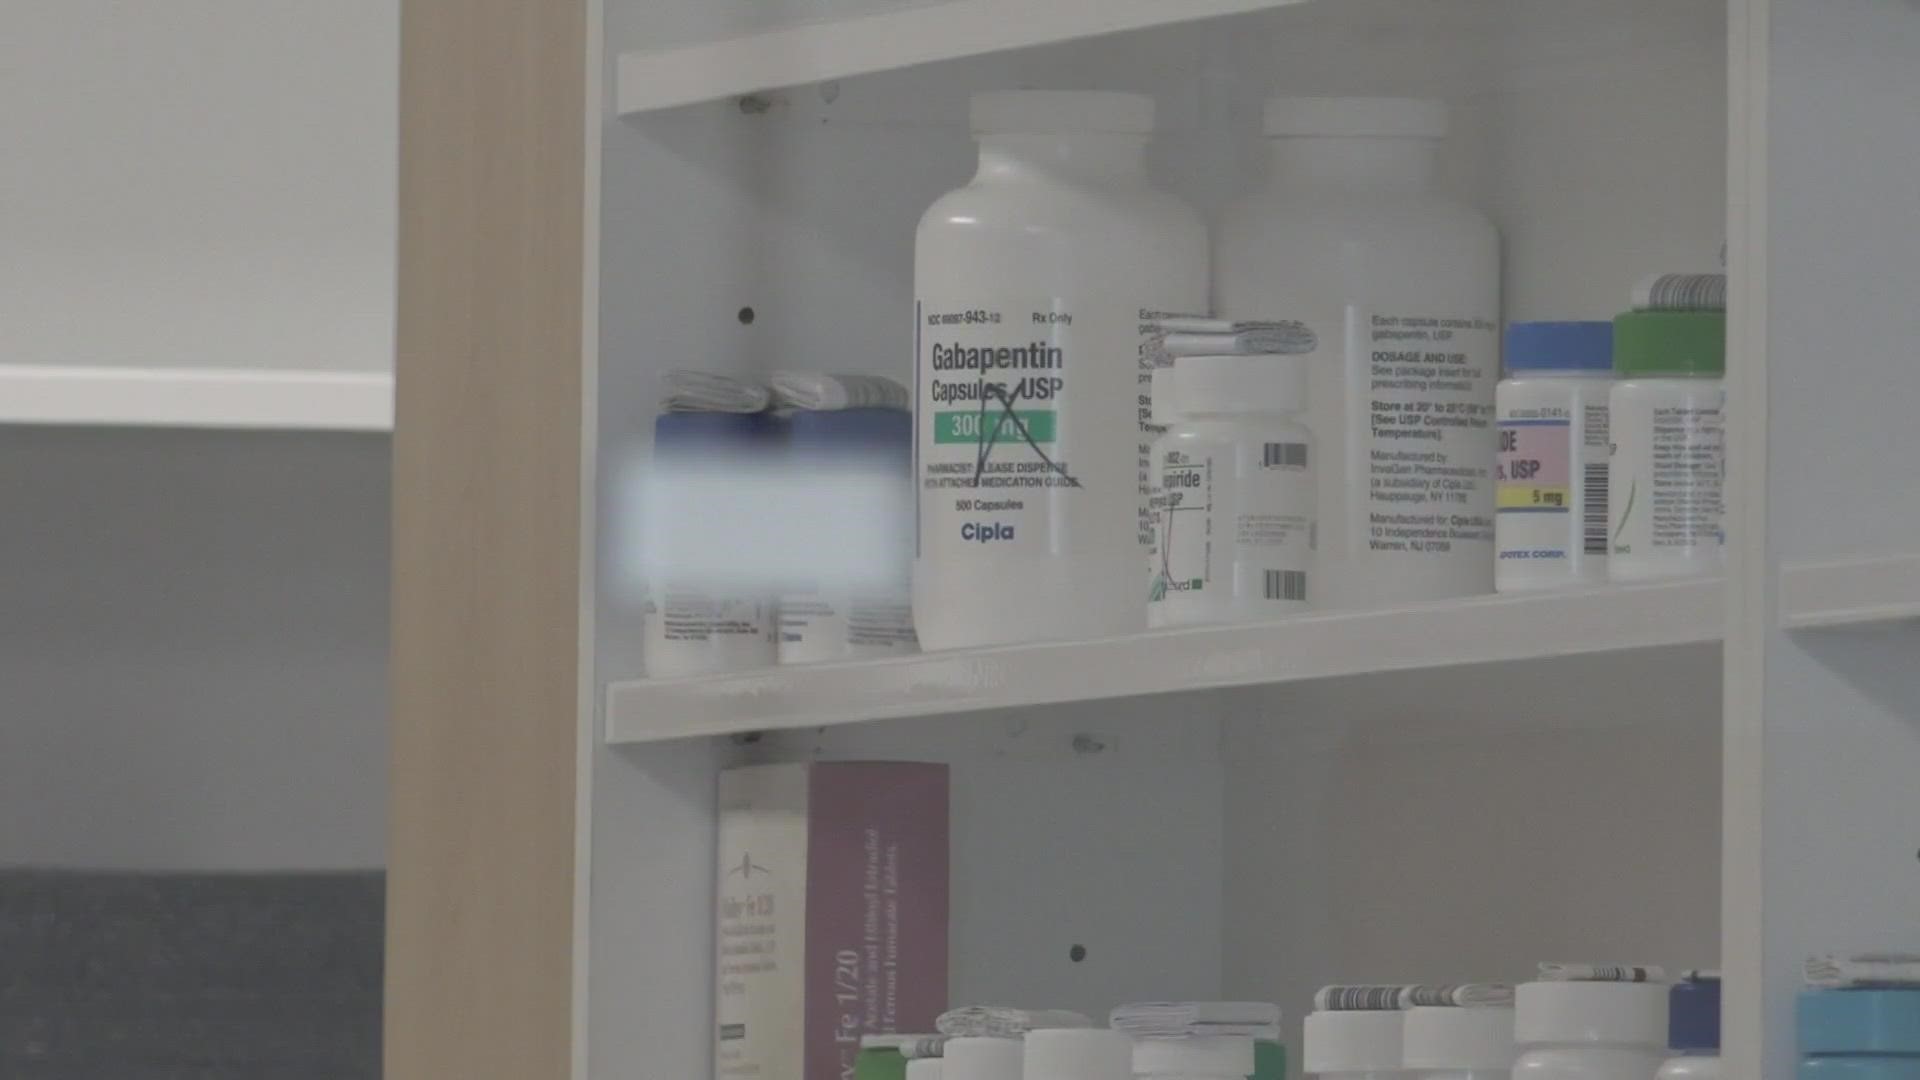 A rise in strep throat cases is causing a shortage of antibiotics at pharmacies. Healthcare workers said strep is noticeably higher than in recent years.